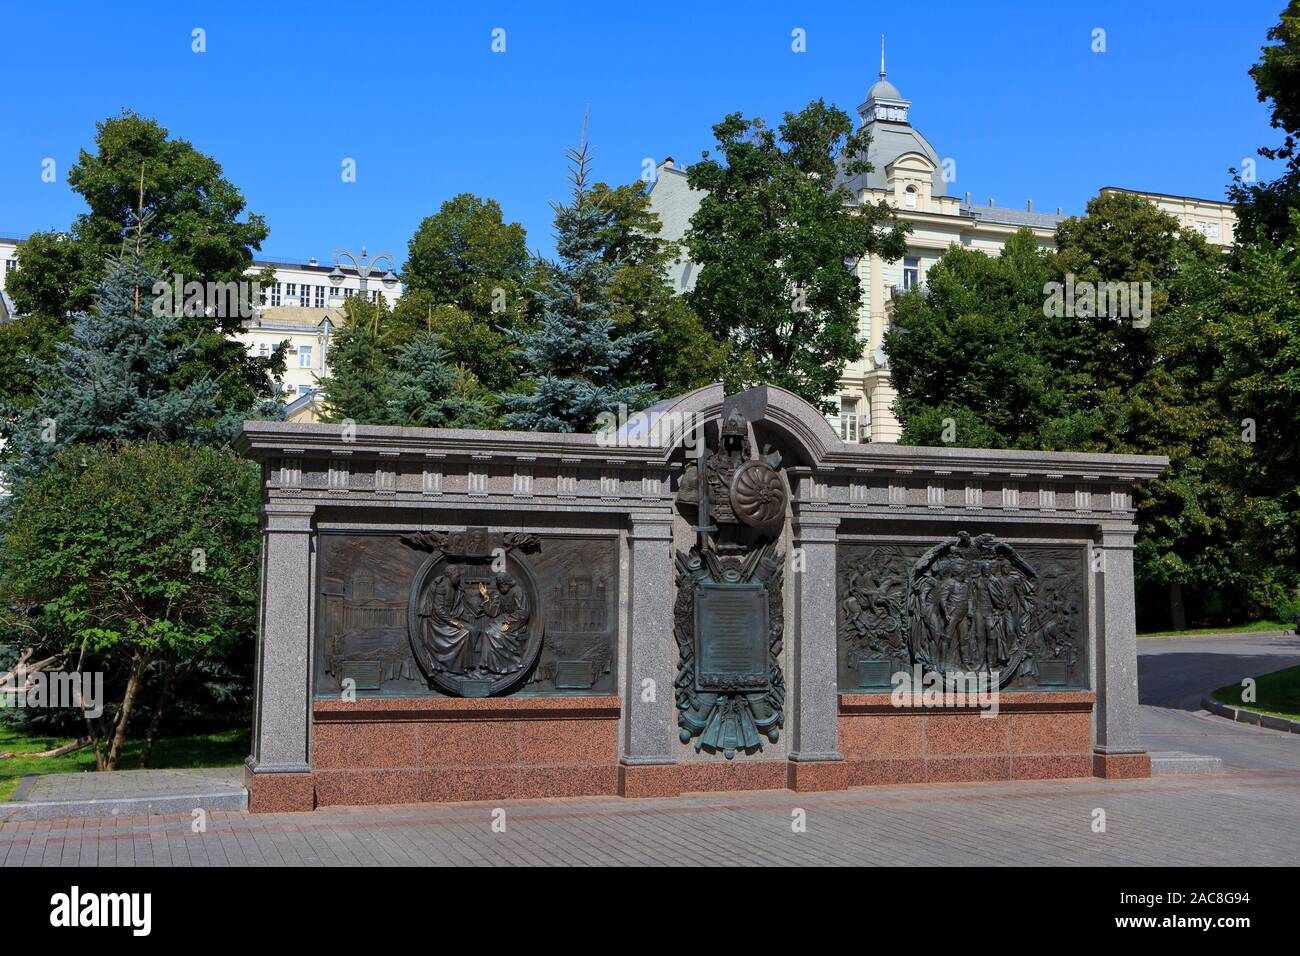 Monument to Tsar Alexander I of Russia and his generals for their victory over Napoleon Bonaparte during the French invasion of Russia in 1812 Stock Photo